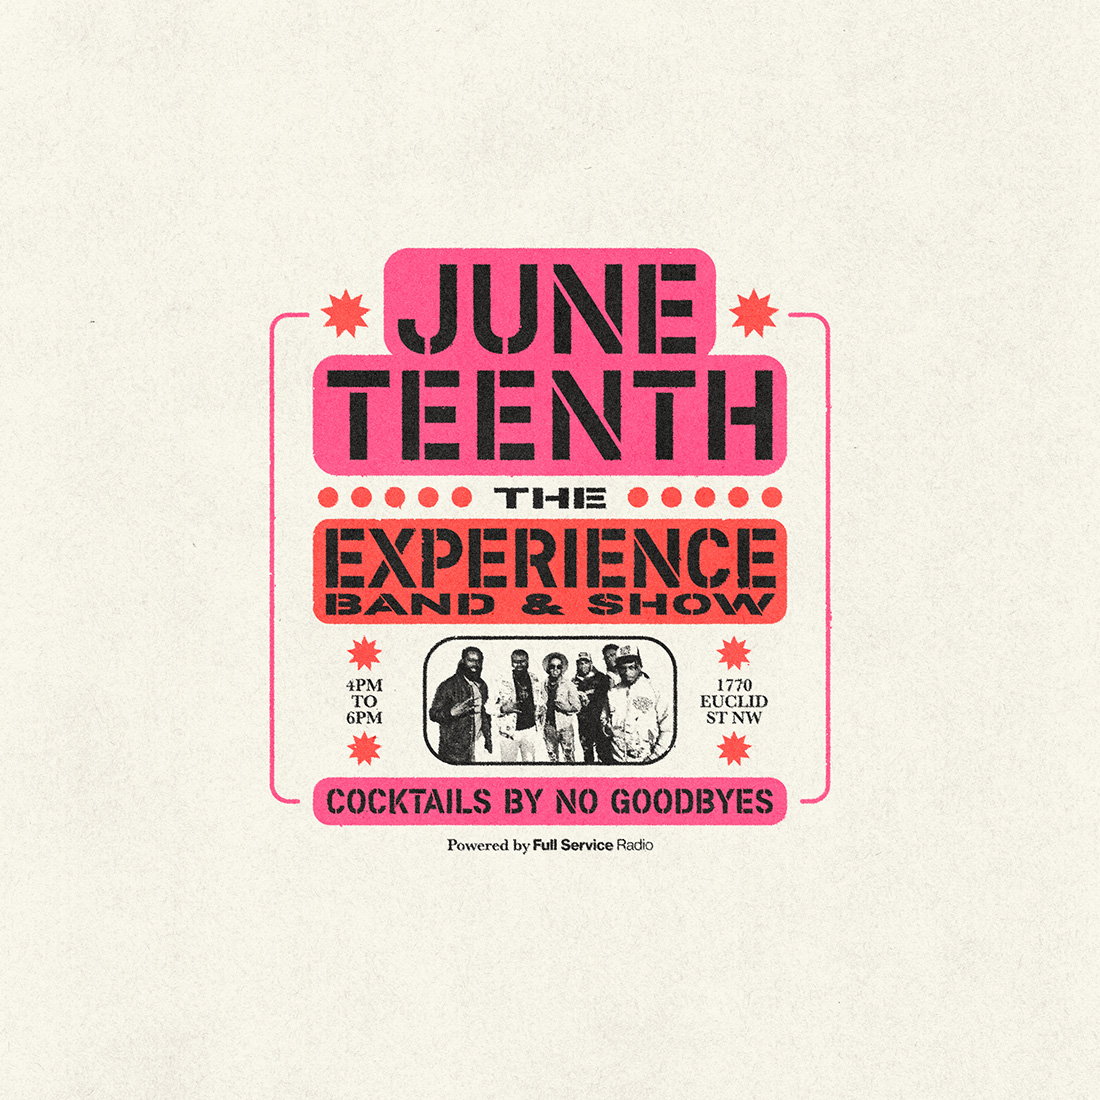 Juneteenth with The Experience Band & Show at the LINE DC